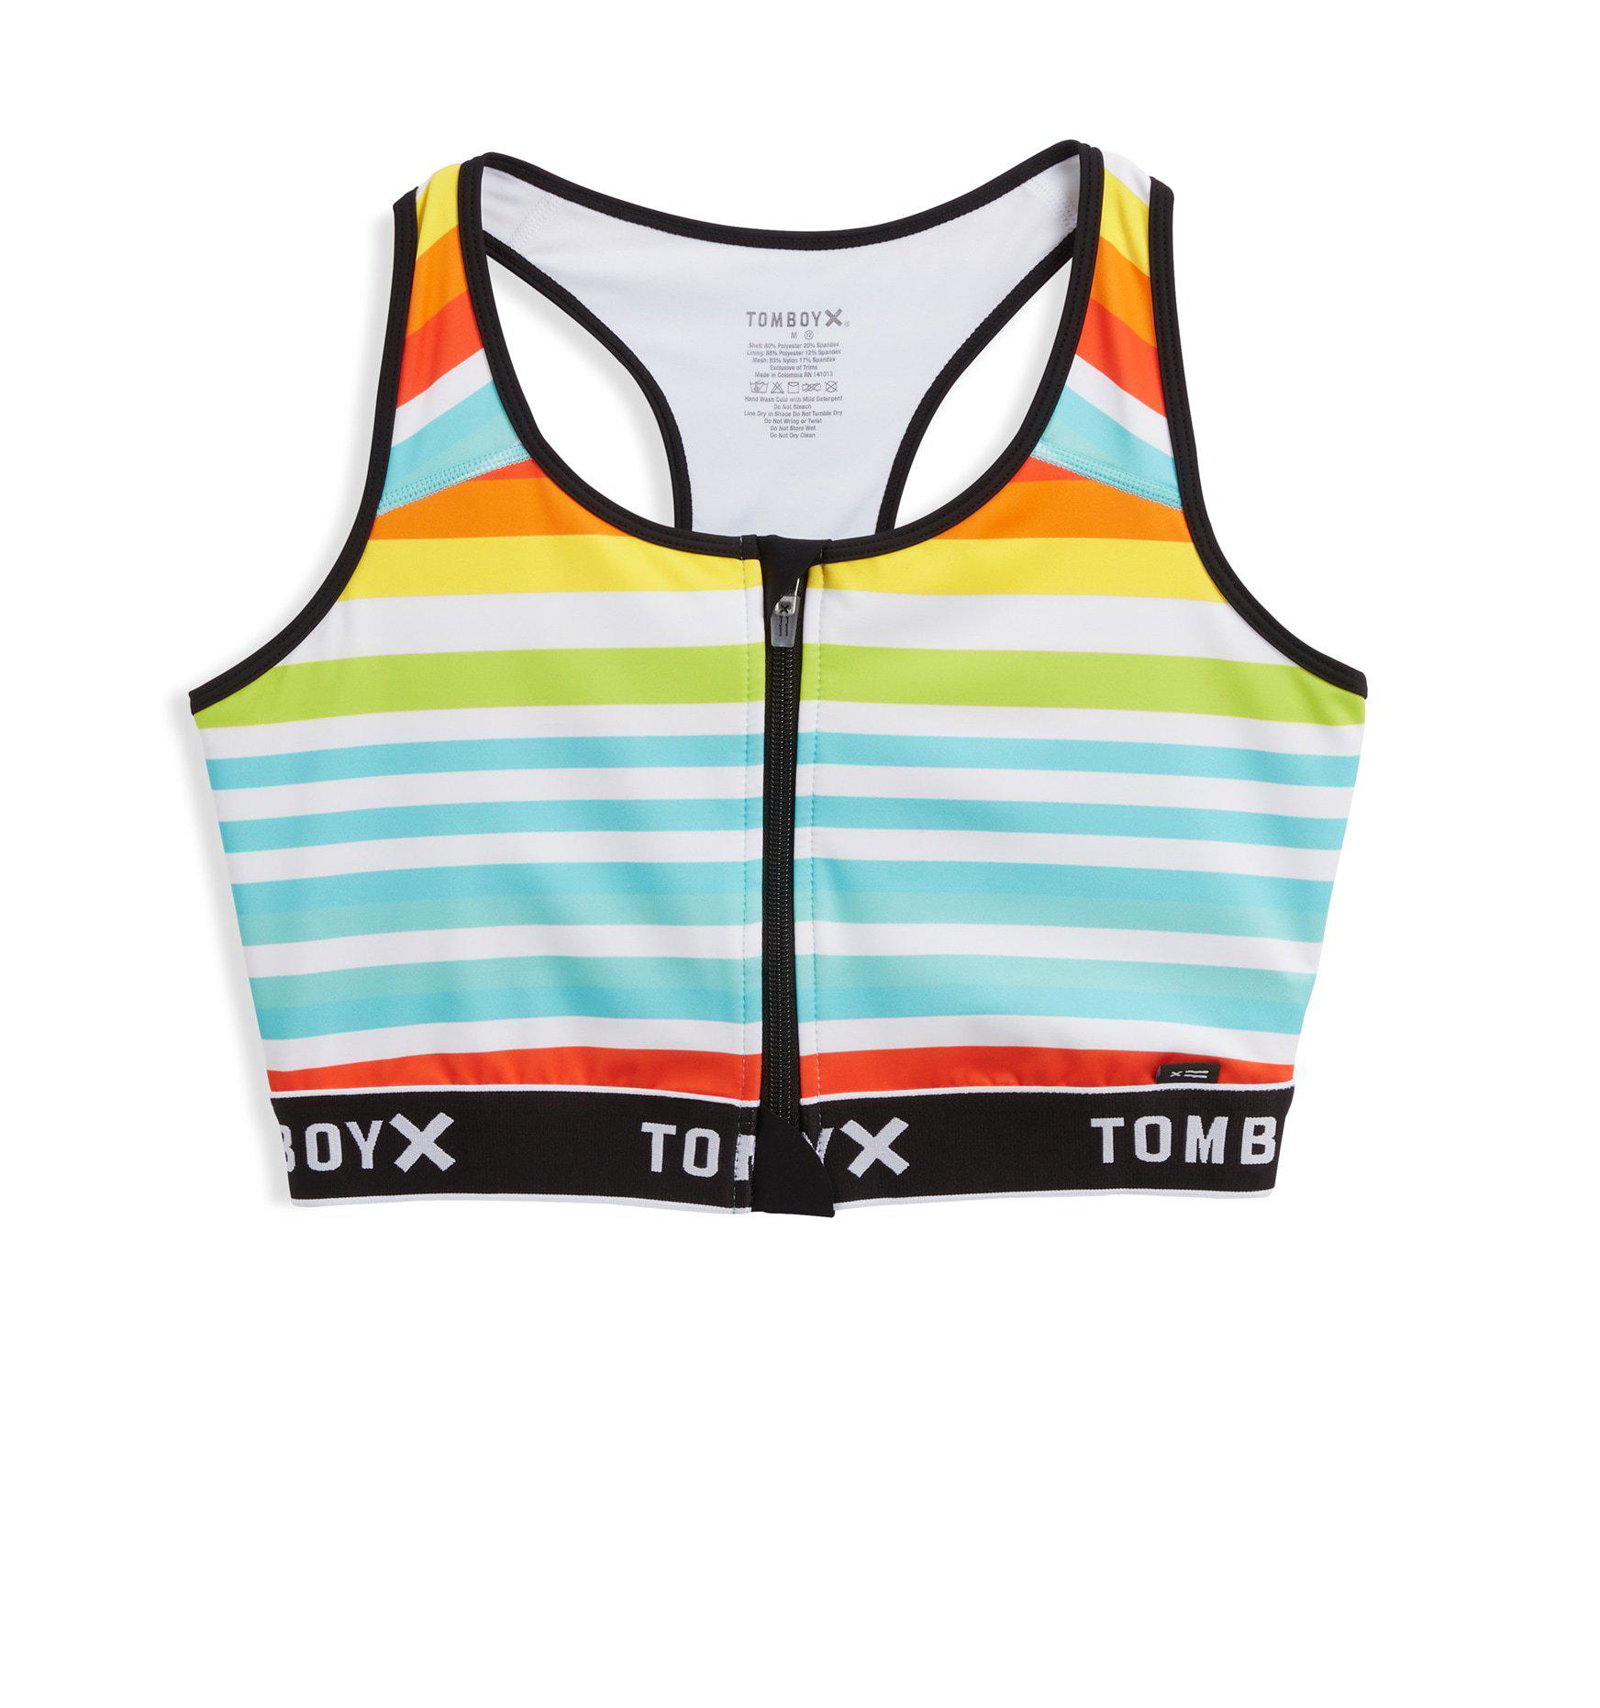 Tomboyx sports bra to the rescue!!! Finally figuring out how to